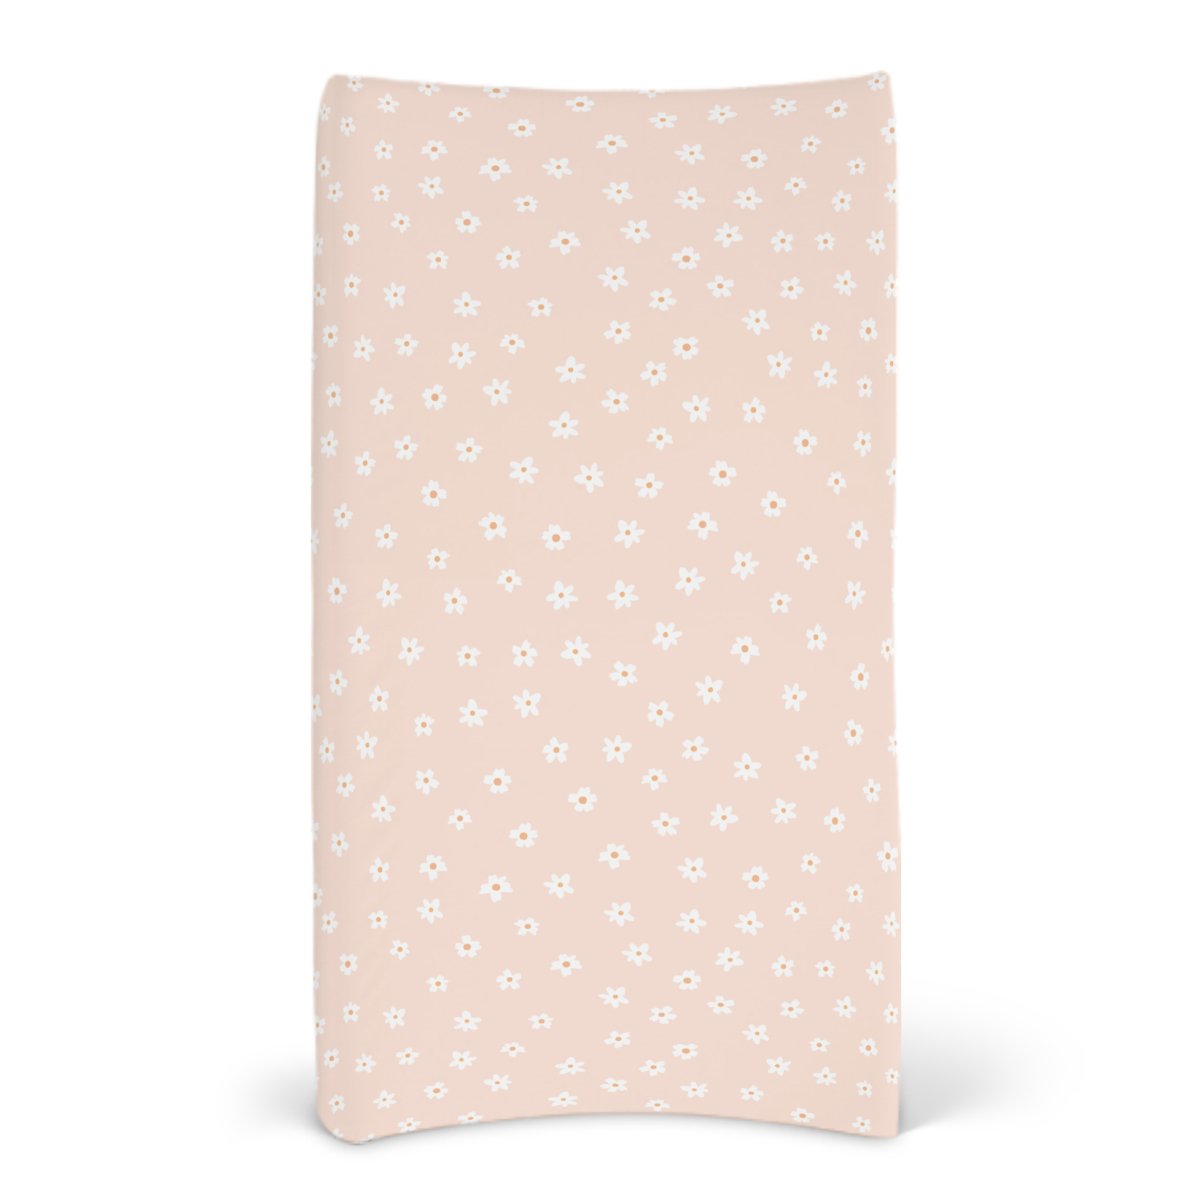 Daisy Changing Pad Cover - Daisy, gender_girl, Theme_Floral